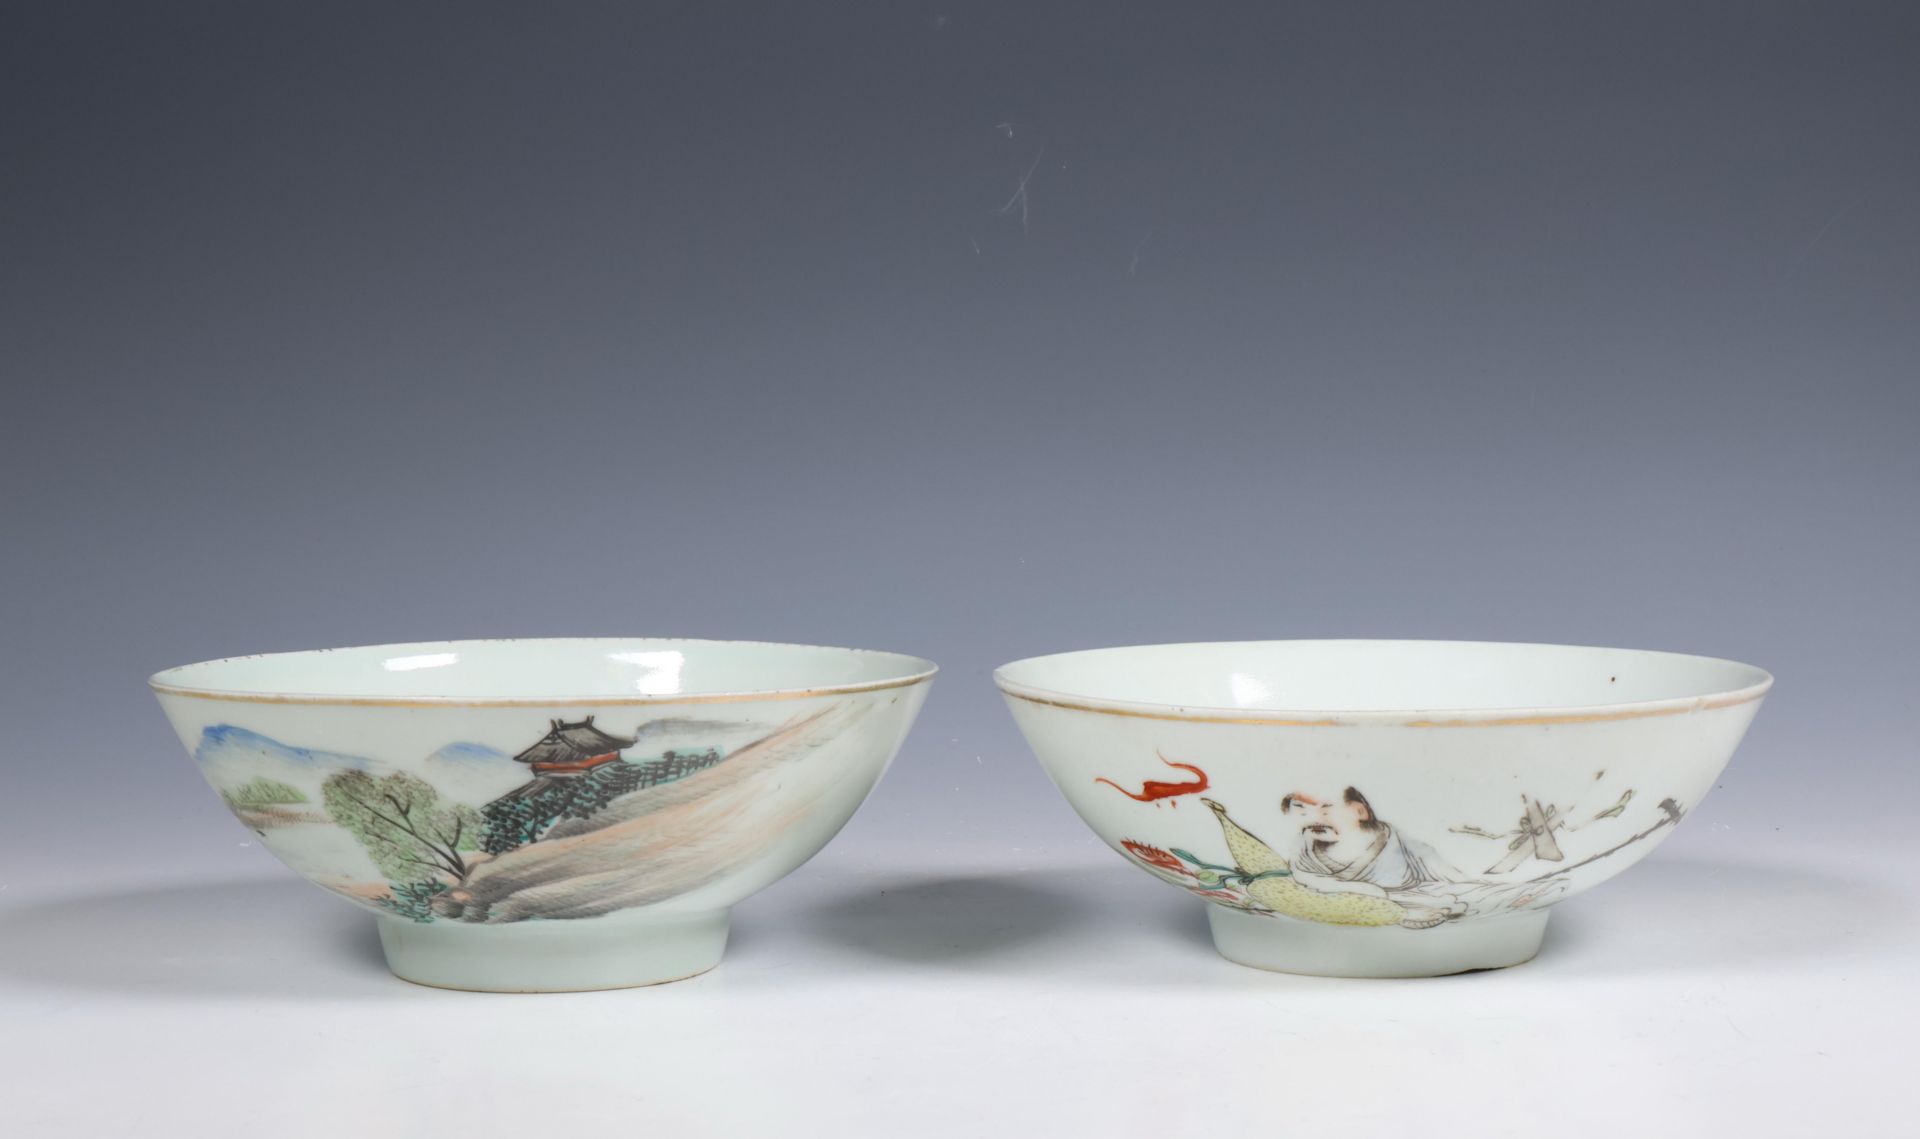 China, two famille verte porcelain 'calligraphic' bowls, 20th century,